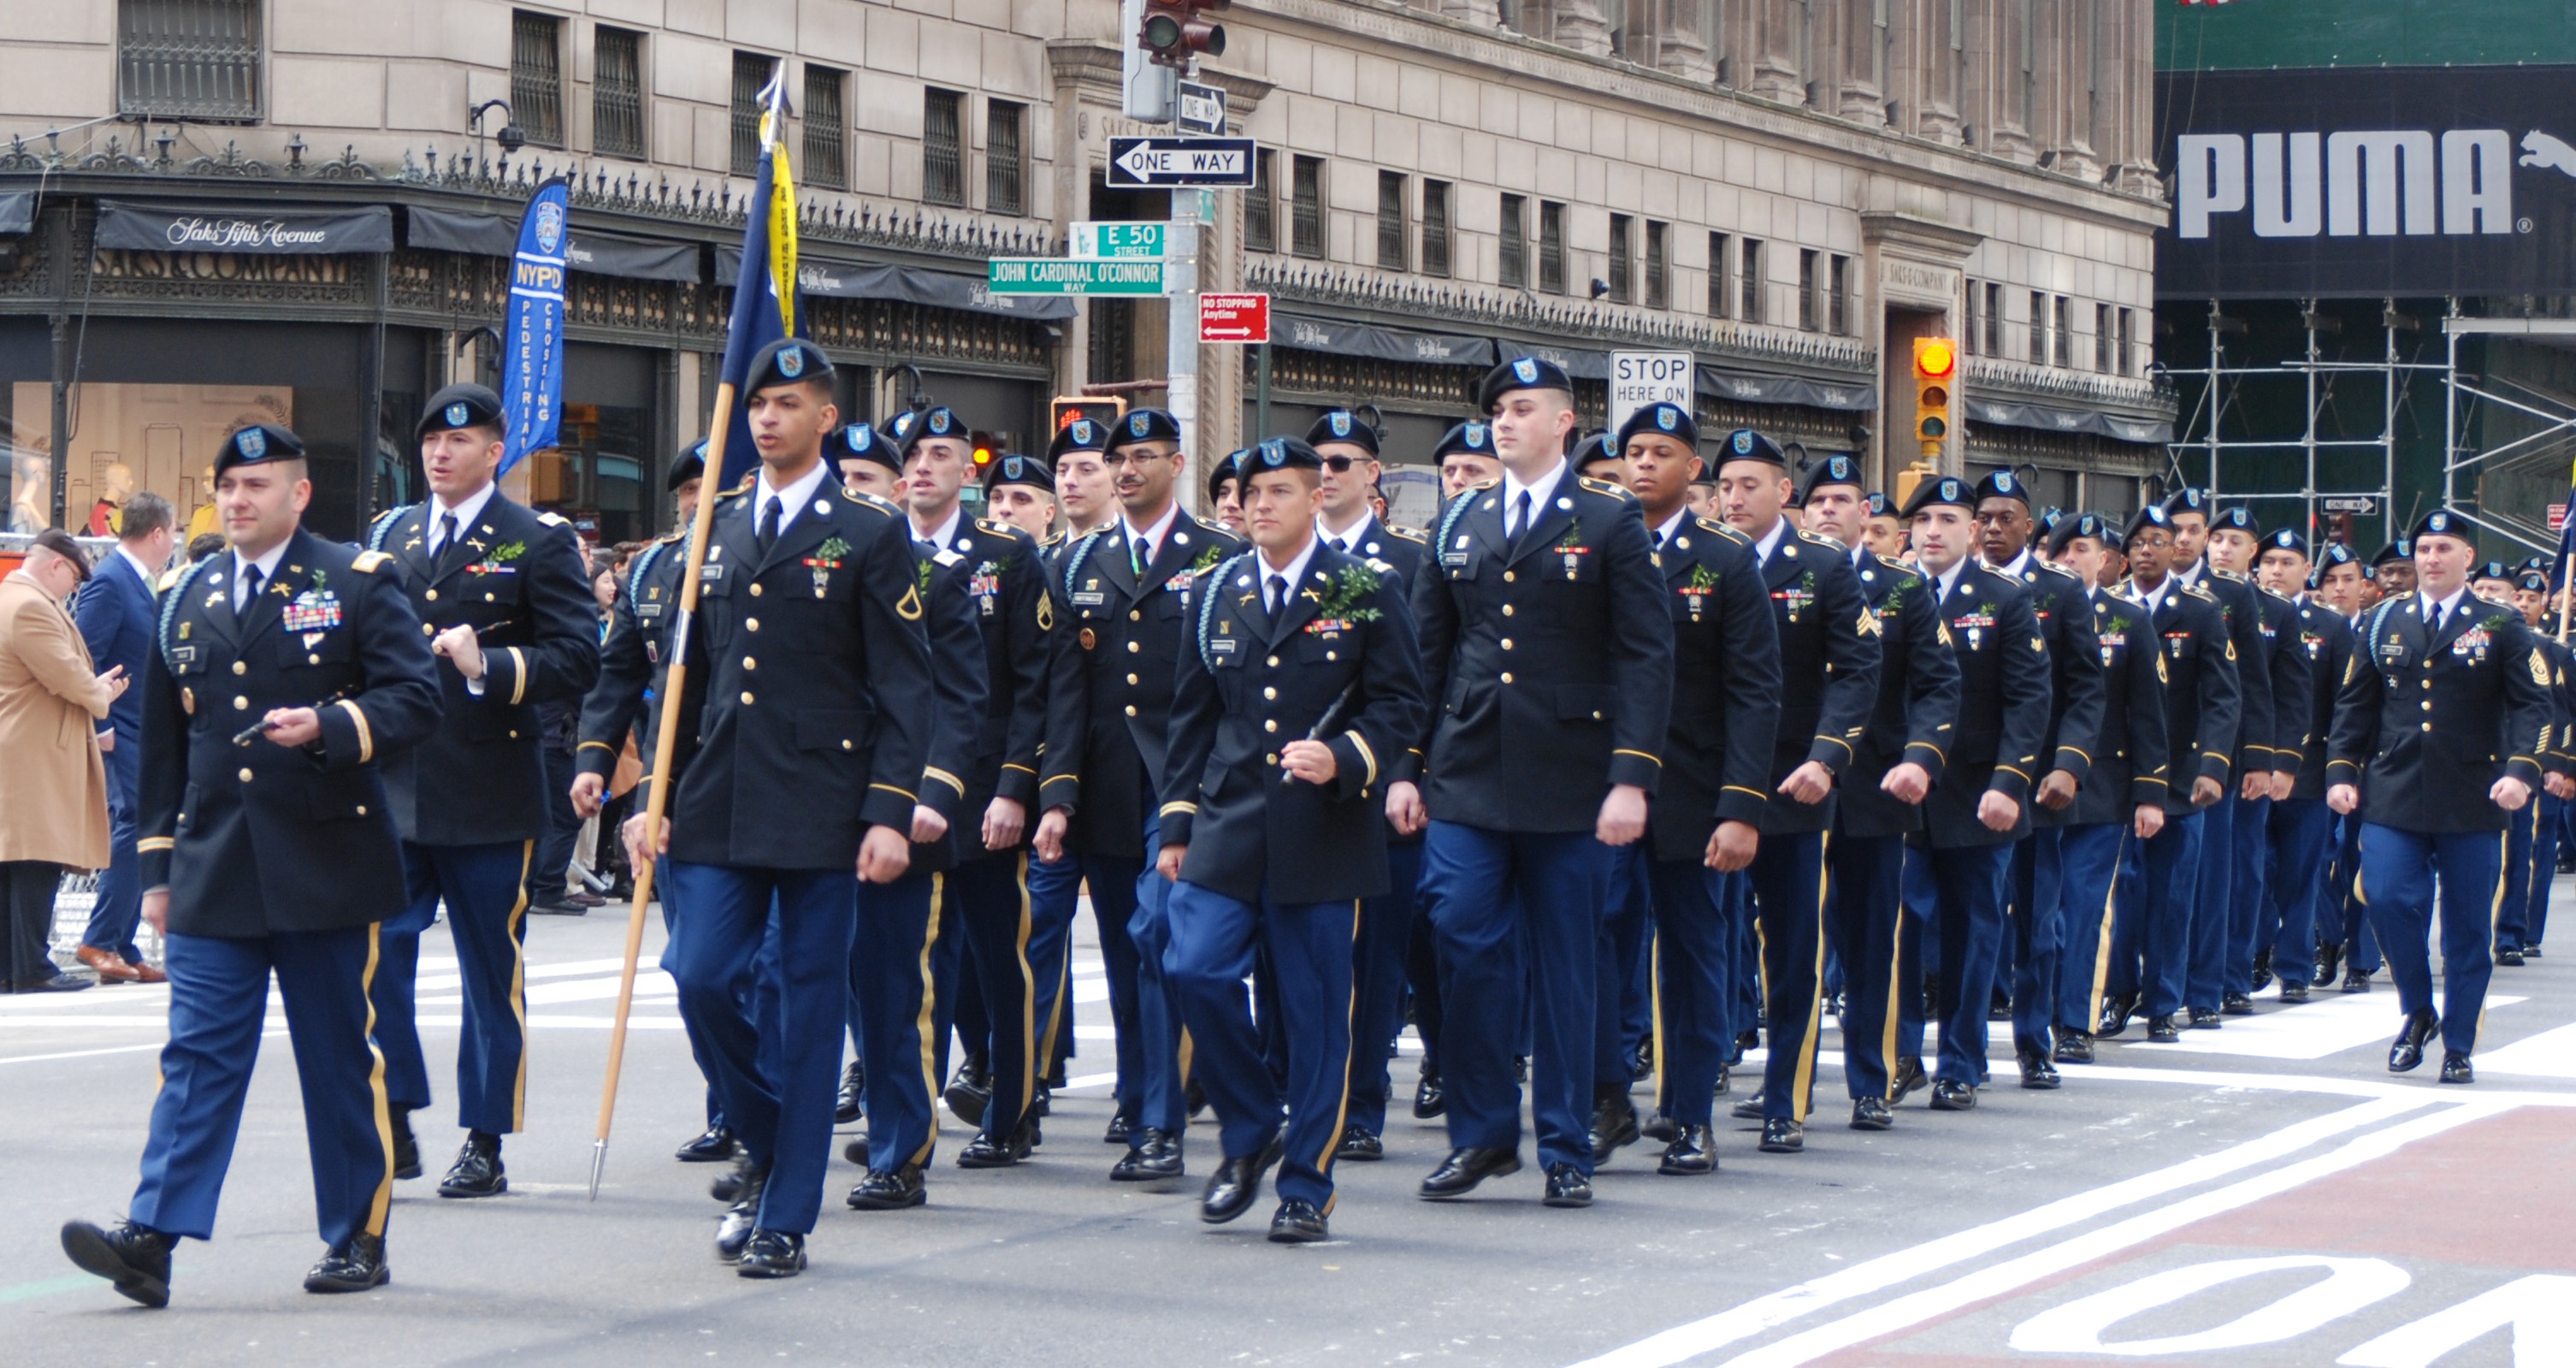 Manhattan, New York – Home to the first St Patrick's Day Parade